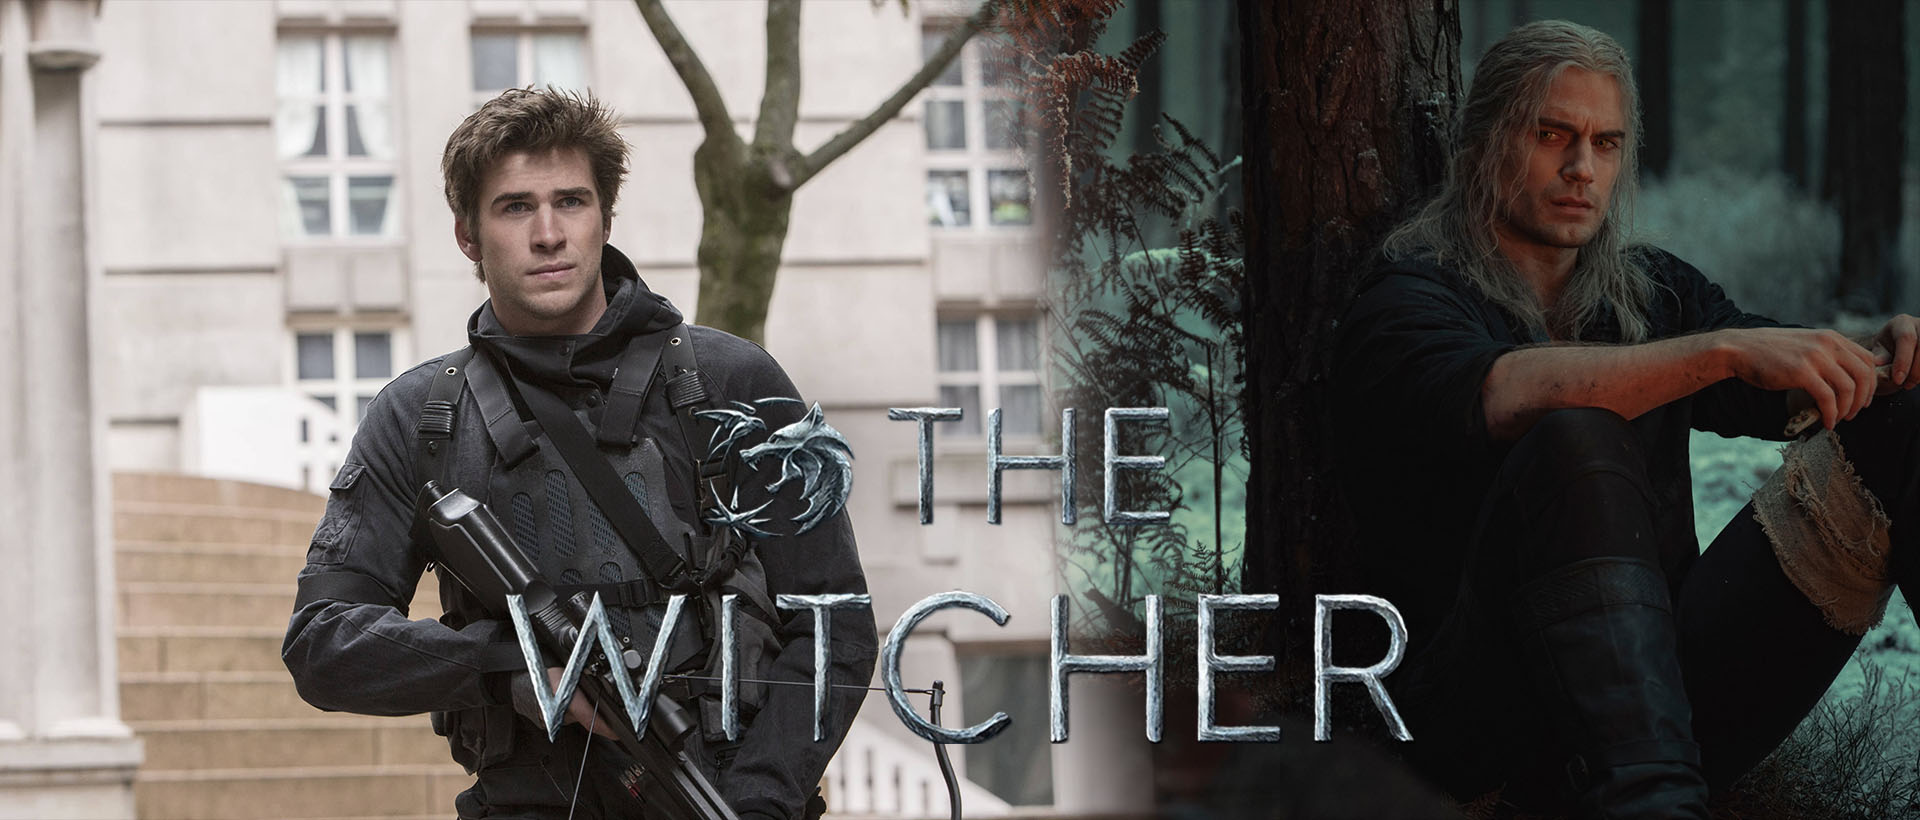 the witcher s4 cavill hemsworth banner